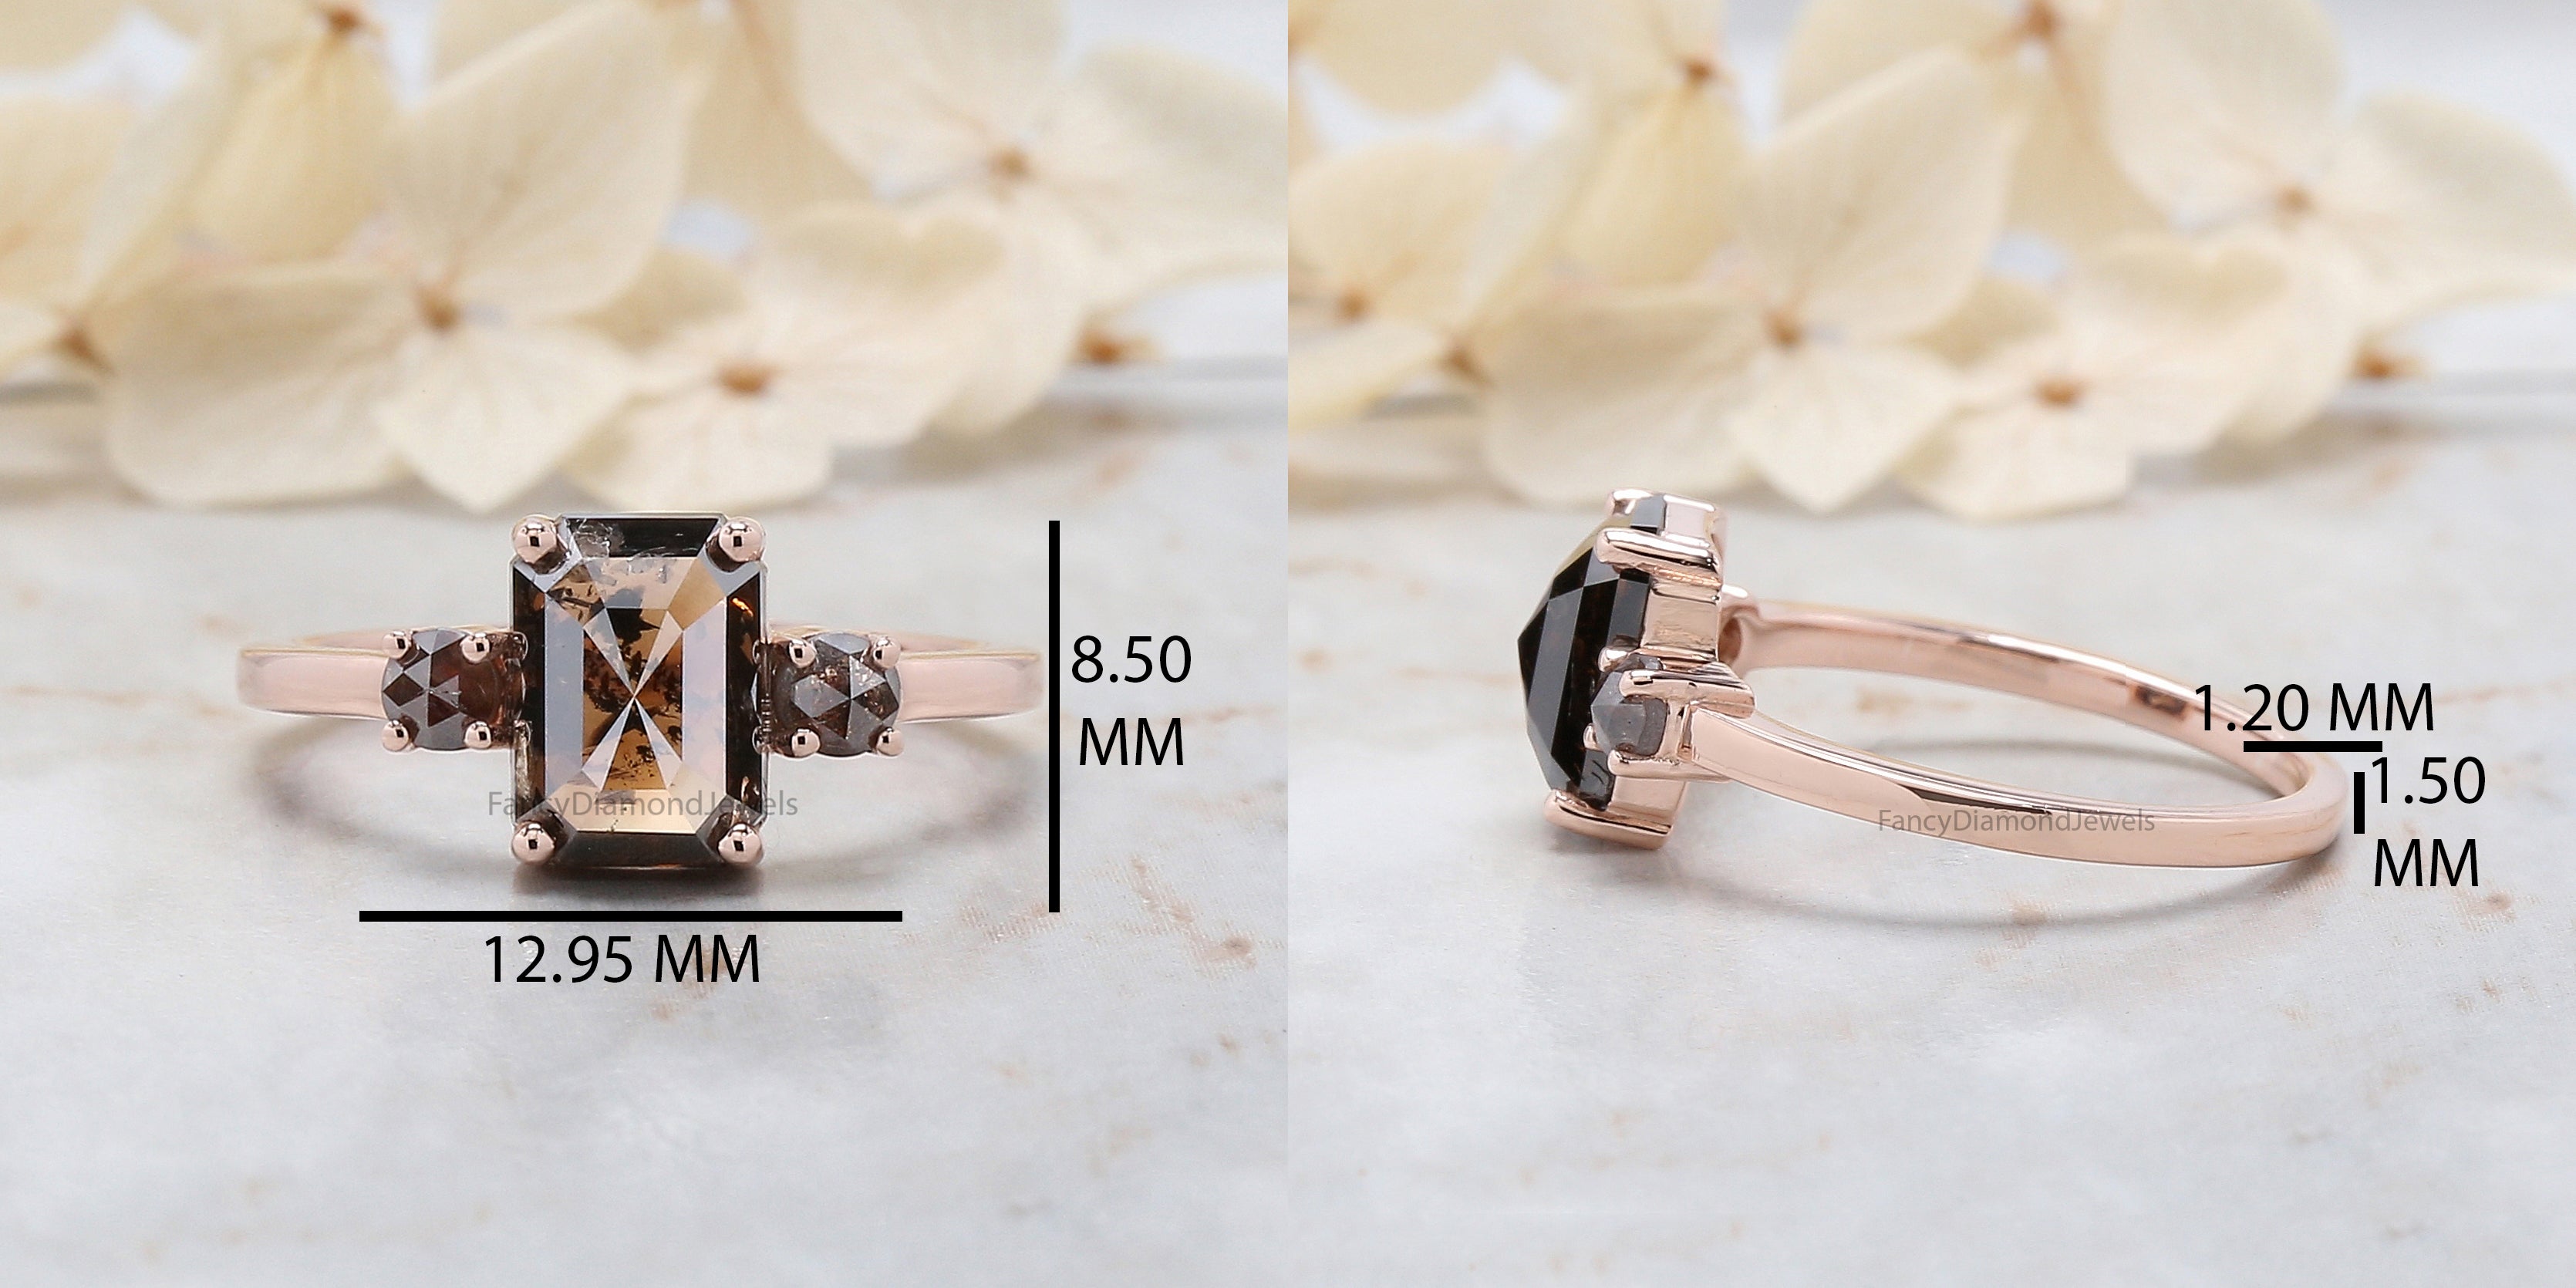 Emerald Cut Brown Color Diamond Ring 1.93 Ct 8.40 MM Emerald Shape Diamond Ring 14K Rose Gold Silver Engagement Ring Gift For Her QL9595